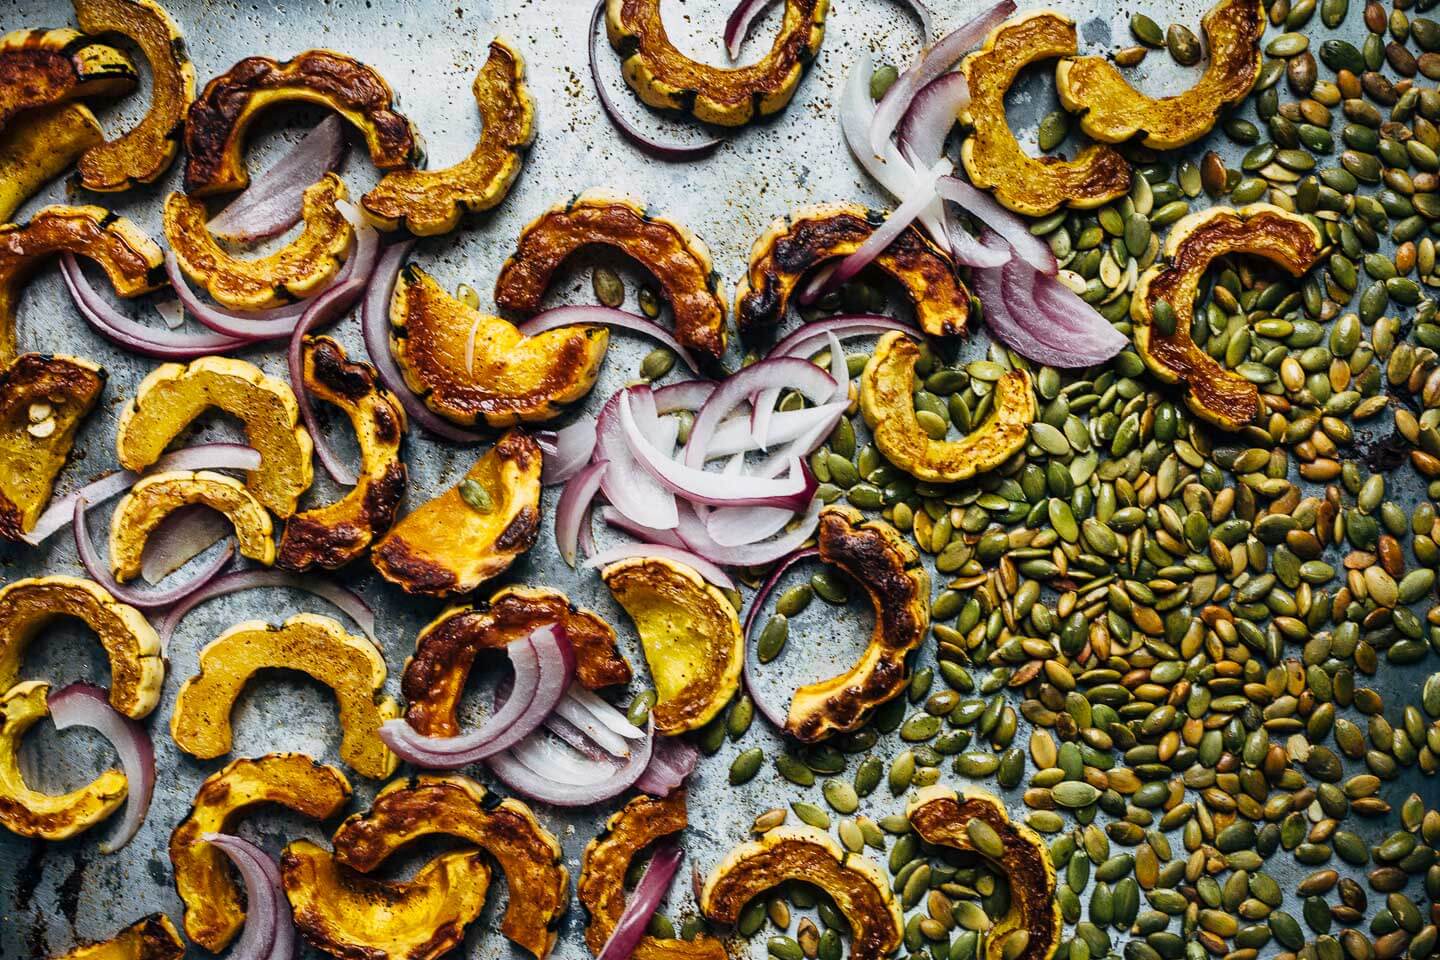 A vibrant, yet sturdy, pearl couscous and roasted delicata squash salad, tossed with tender kale, pomegranate arils, pepitas, and crumbled goat cheese, that's perfect as autumnal side dish or a versatile meal prep lunch. 